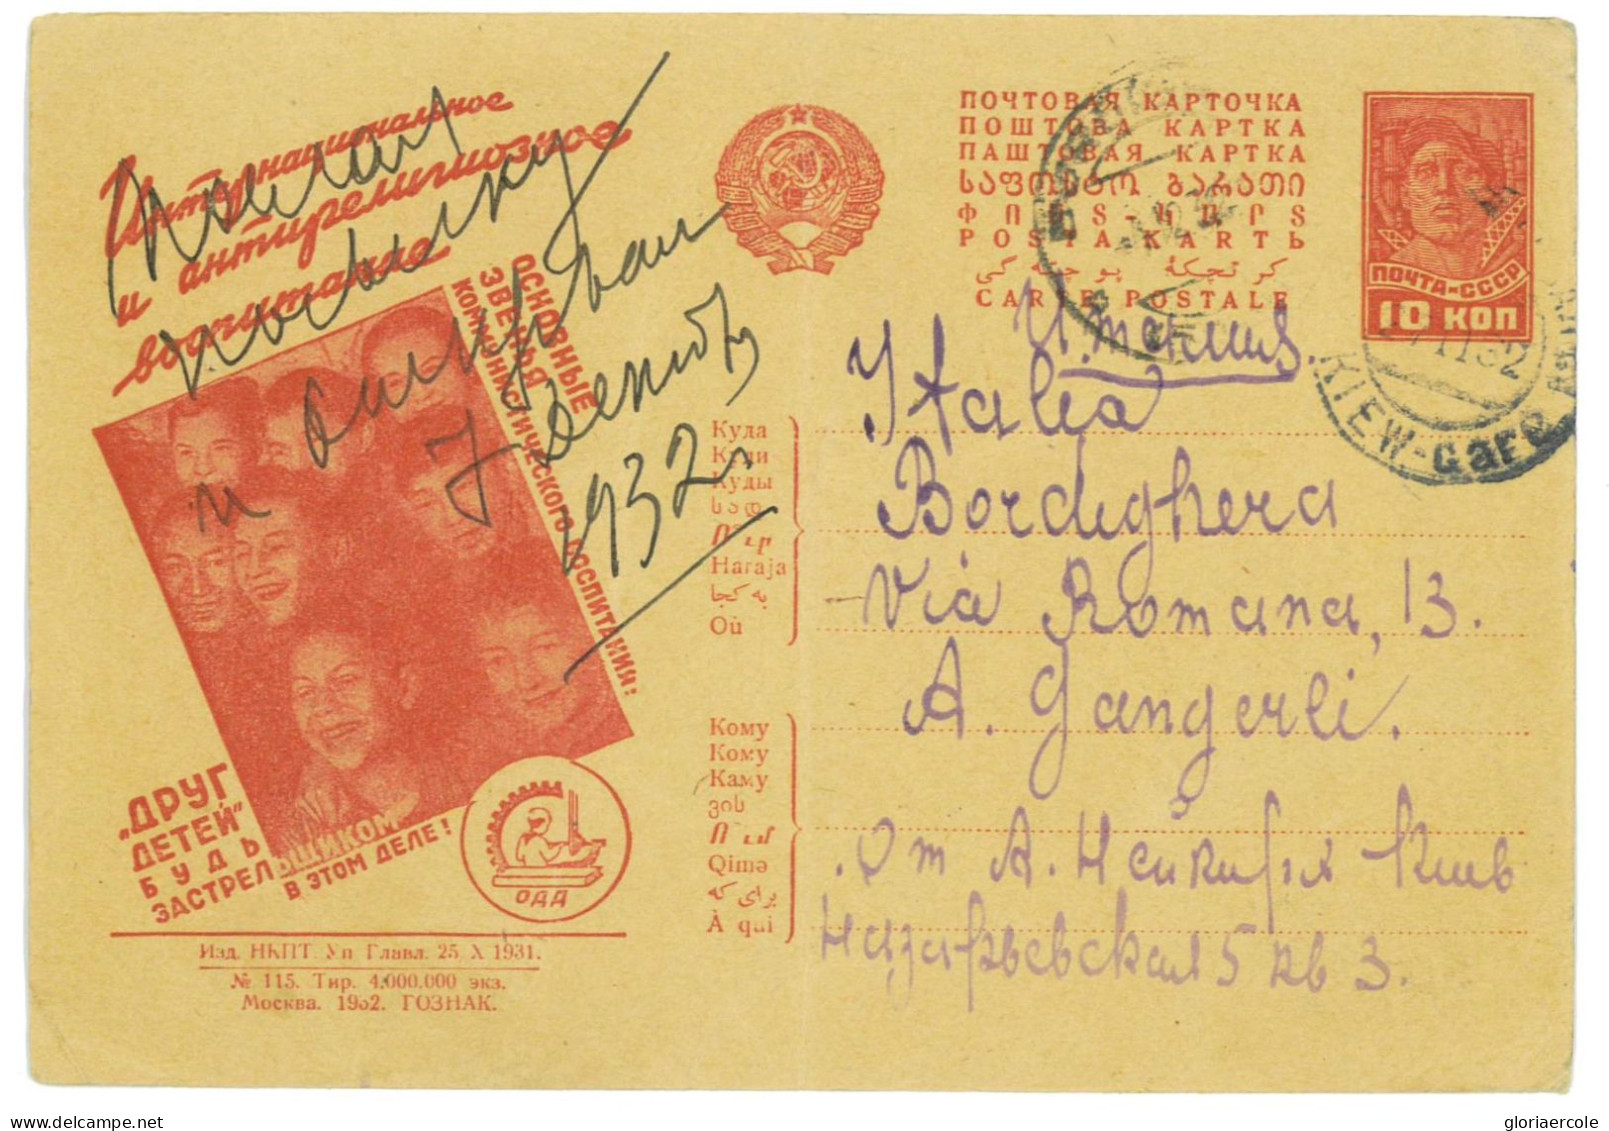 P2920 - RUSSIA , STATIONERY POST CARD MICHEL P127 /115 USED TO ITALY, 1932 - Storia Postale